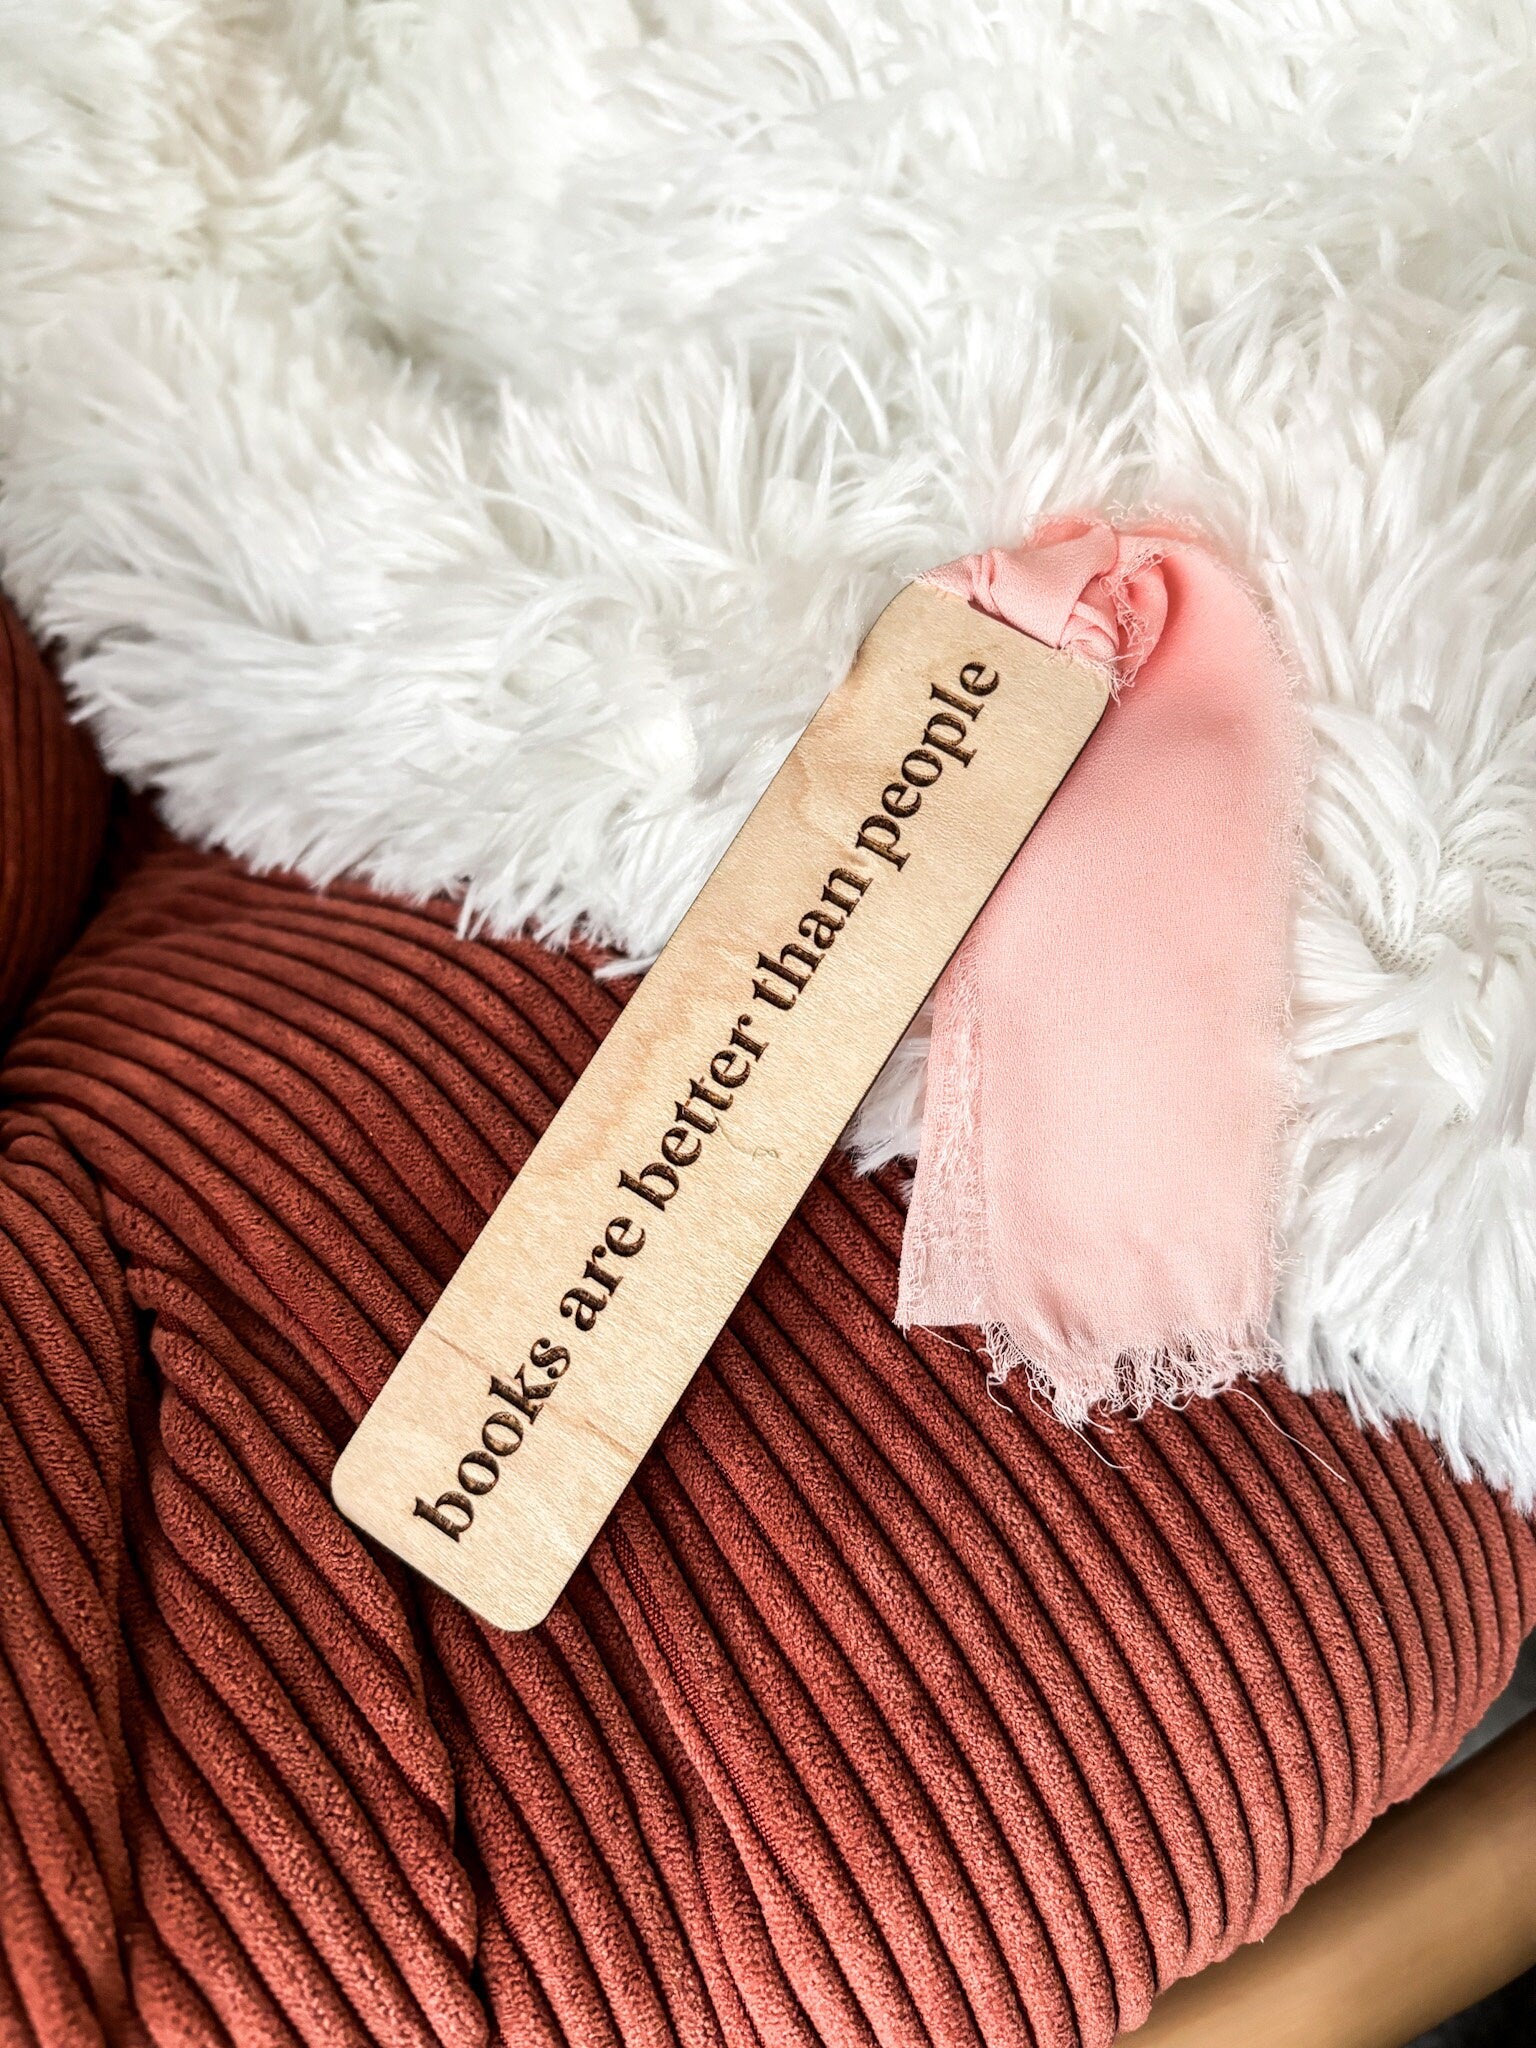 Books Are Better Than People Wood Bookmark, Acrylic Bookmark, Funny Bookmark Gift, Laser Engraved Bookmark, Aesthetic Acrylic Bookmark